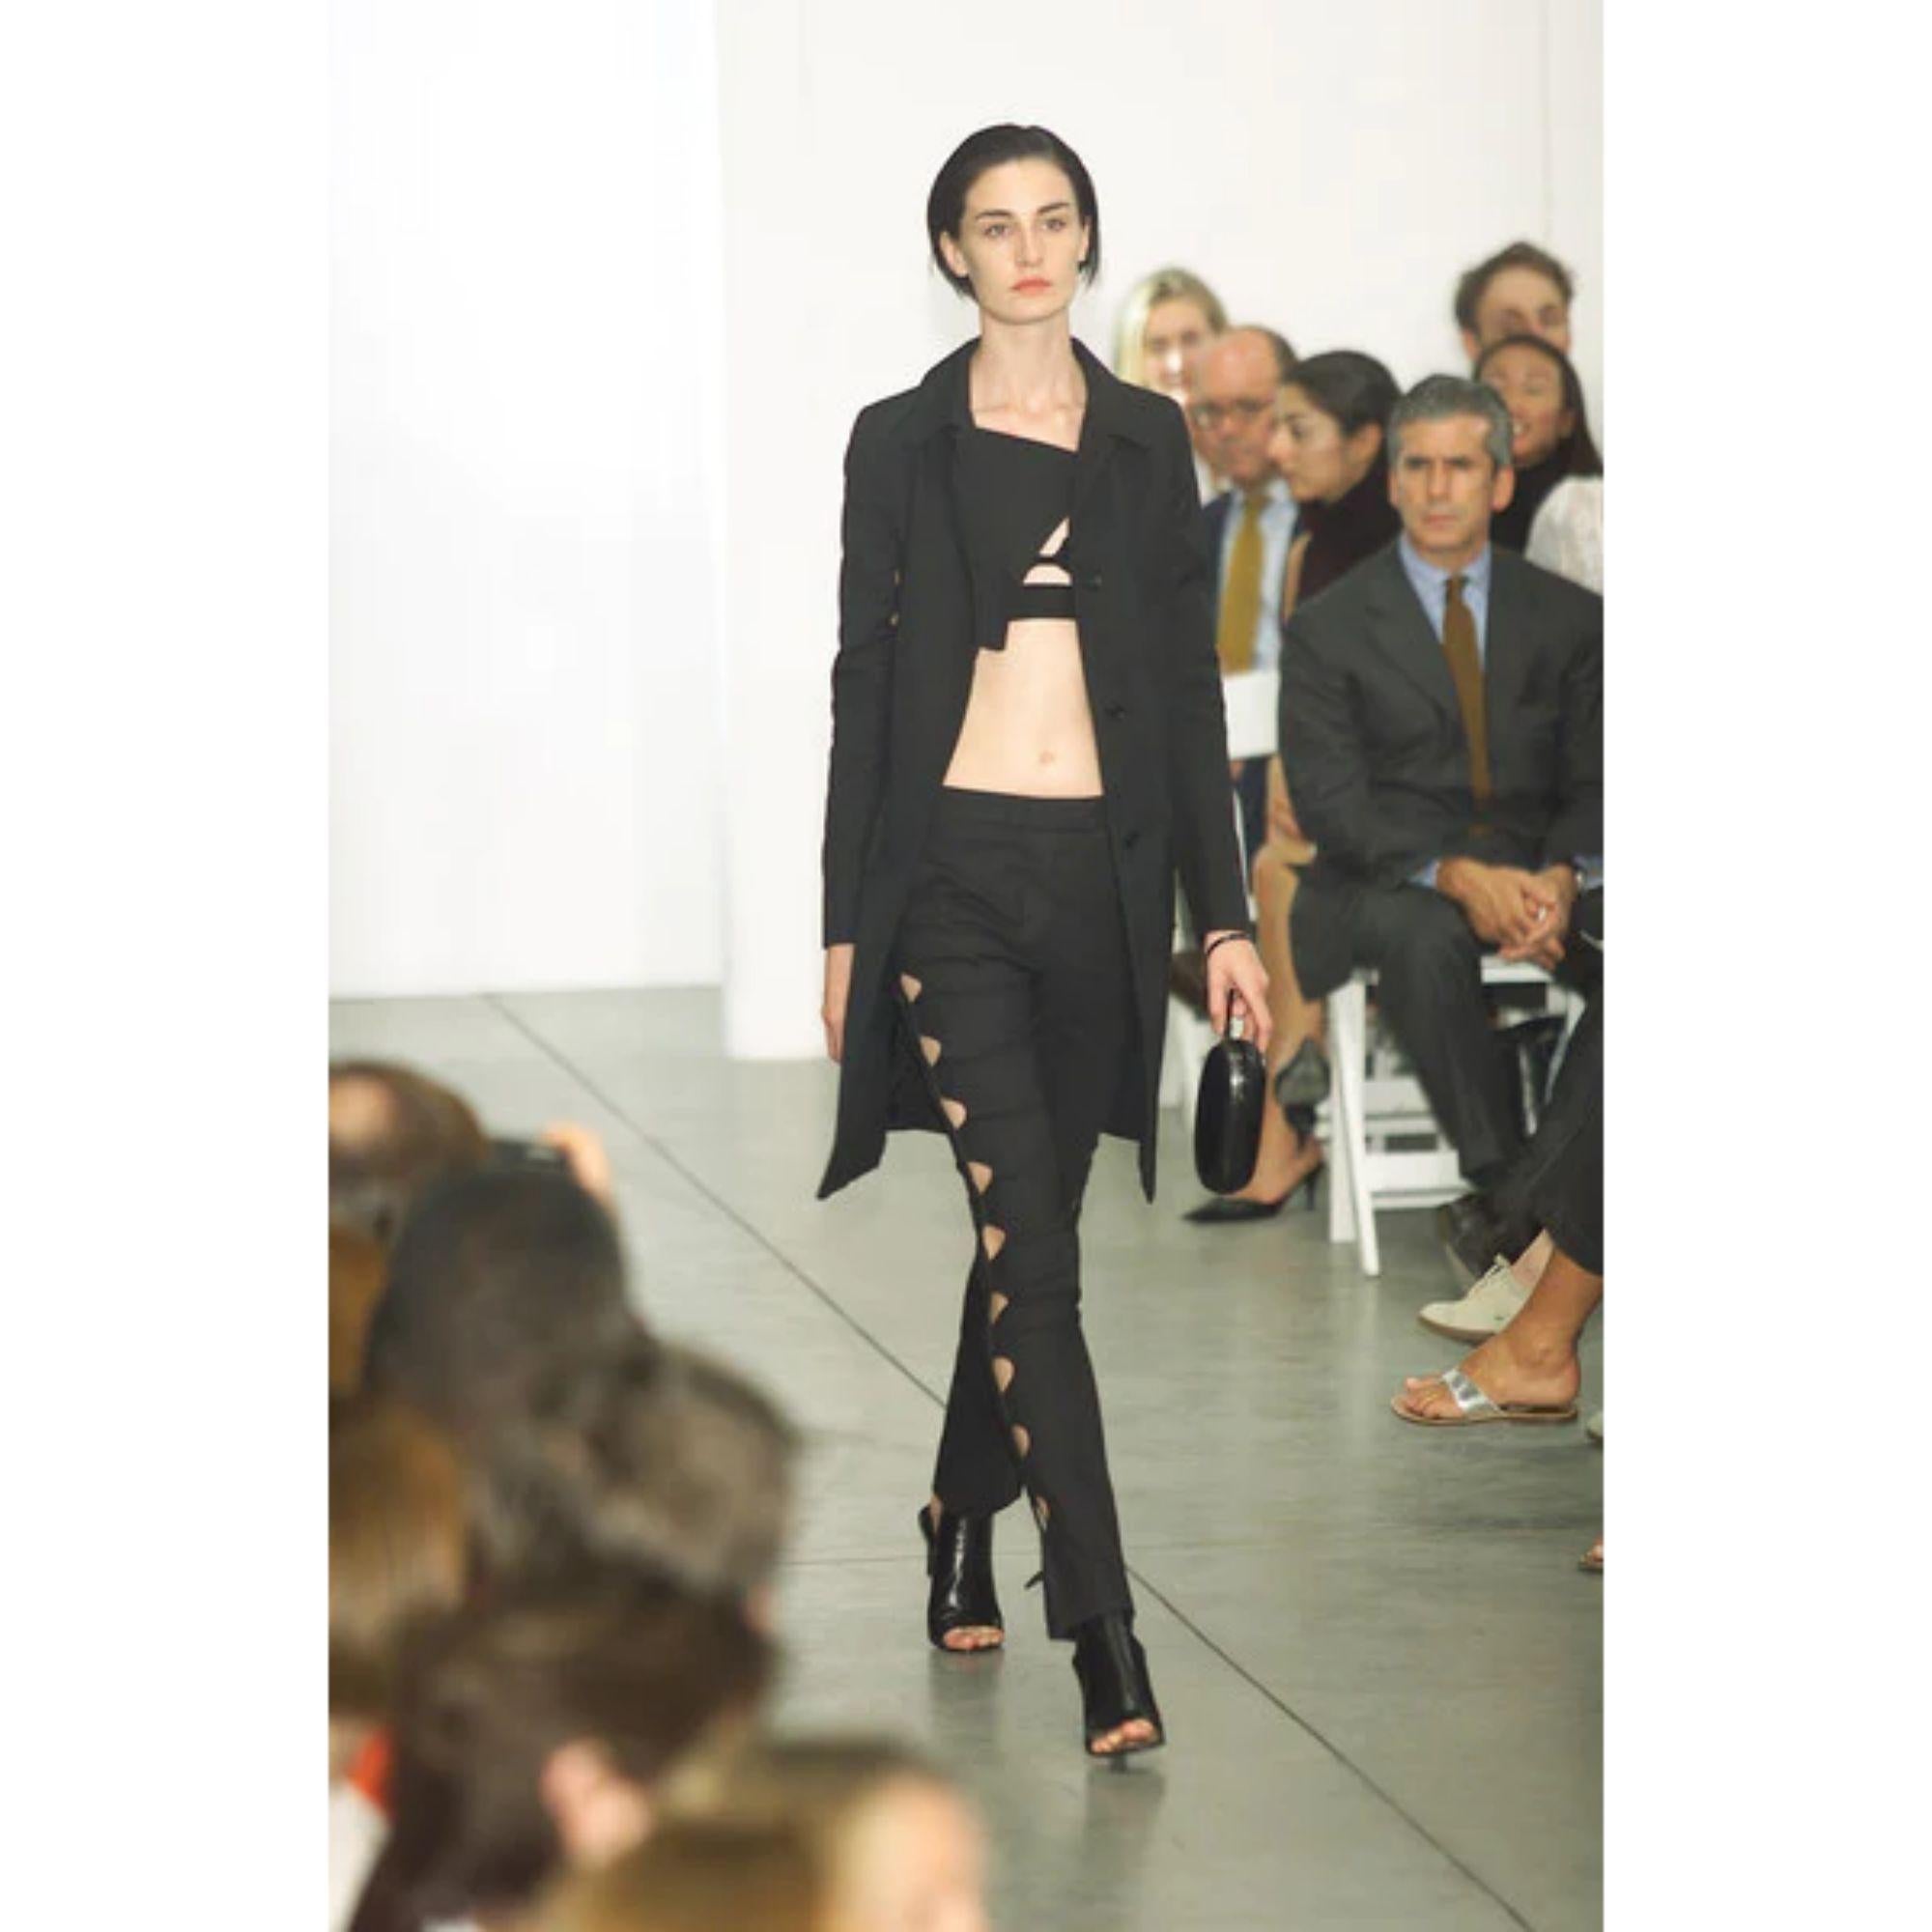 S/S 2001 Helmut Lang black side cutout pants. Mid-rise trouser with futuristic thin cutouts at sides, and thin black straps at hip. As seen on the runway. Matching shirt available (listed separately). In excellent vintage condition with no flaws to